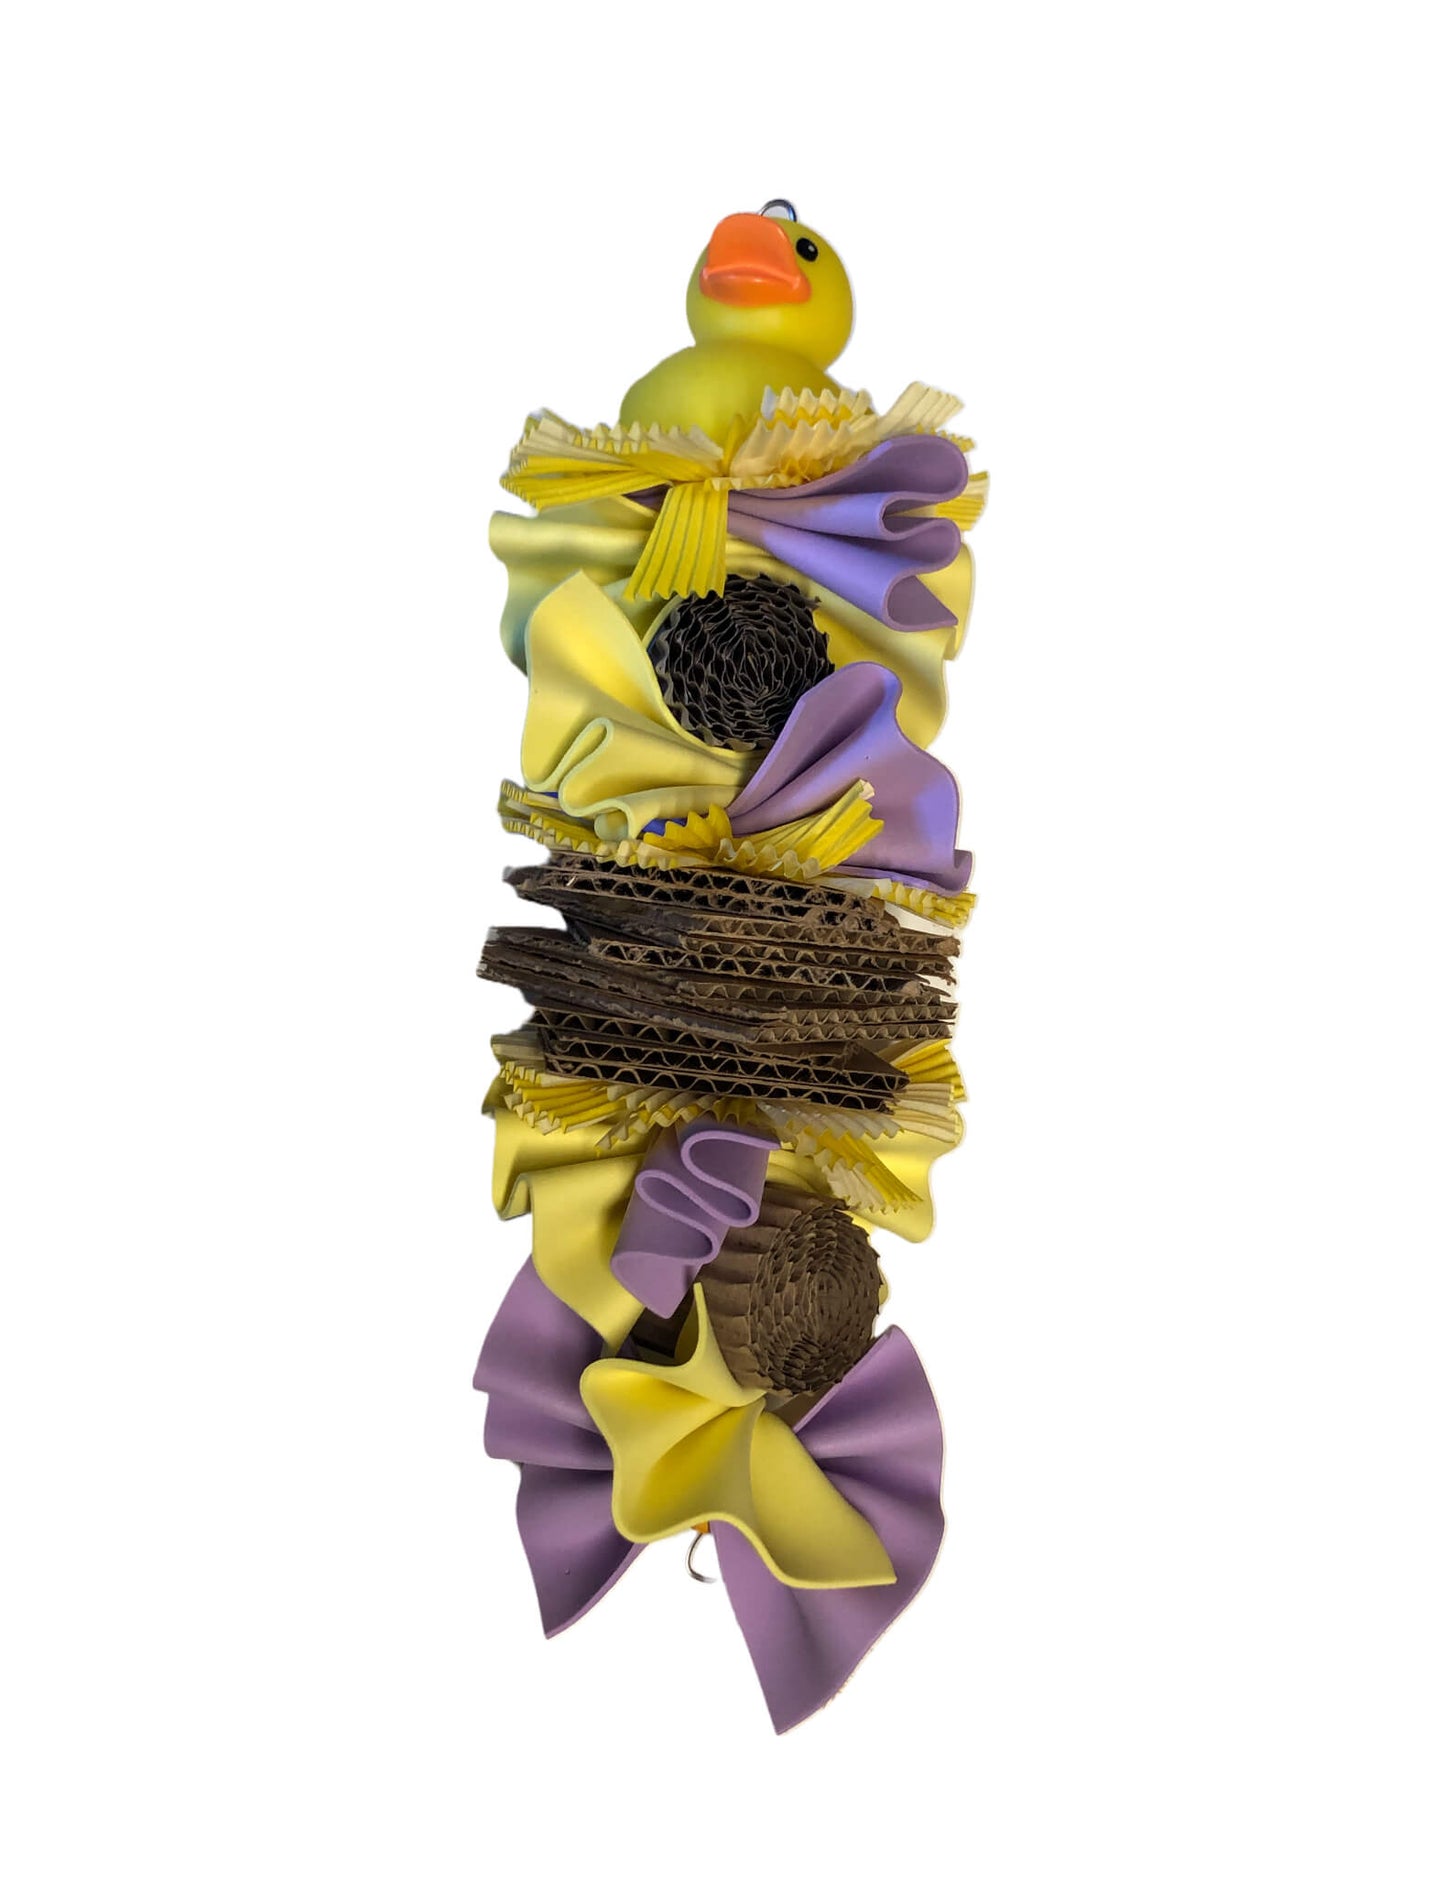 shreddable bird toy with yellow and purple